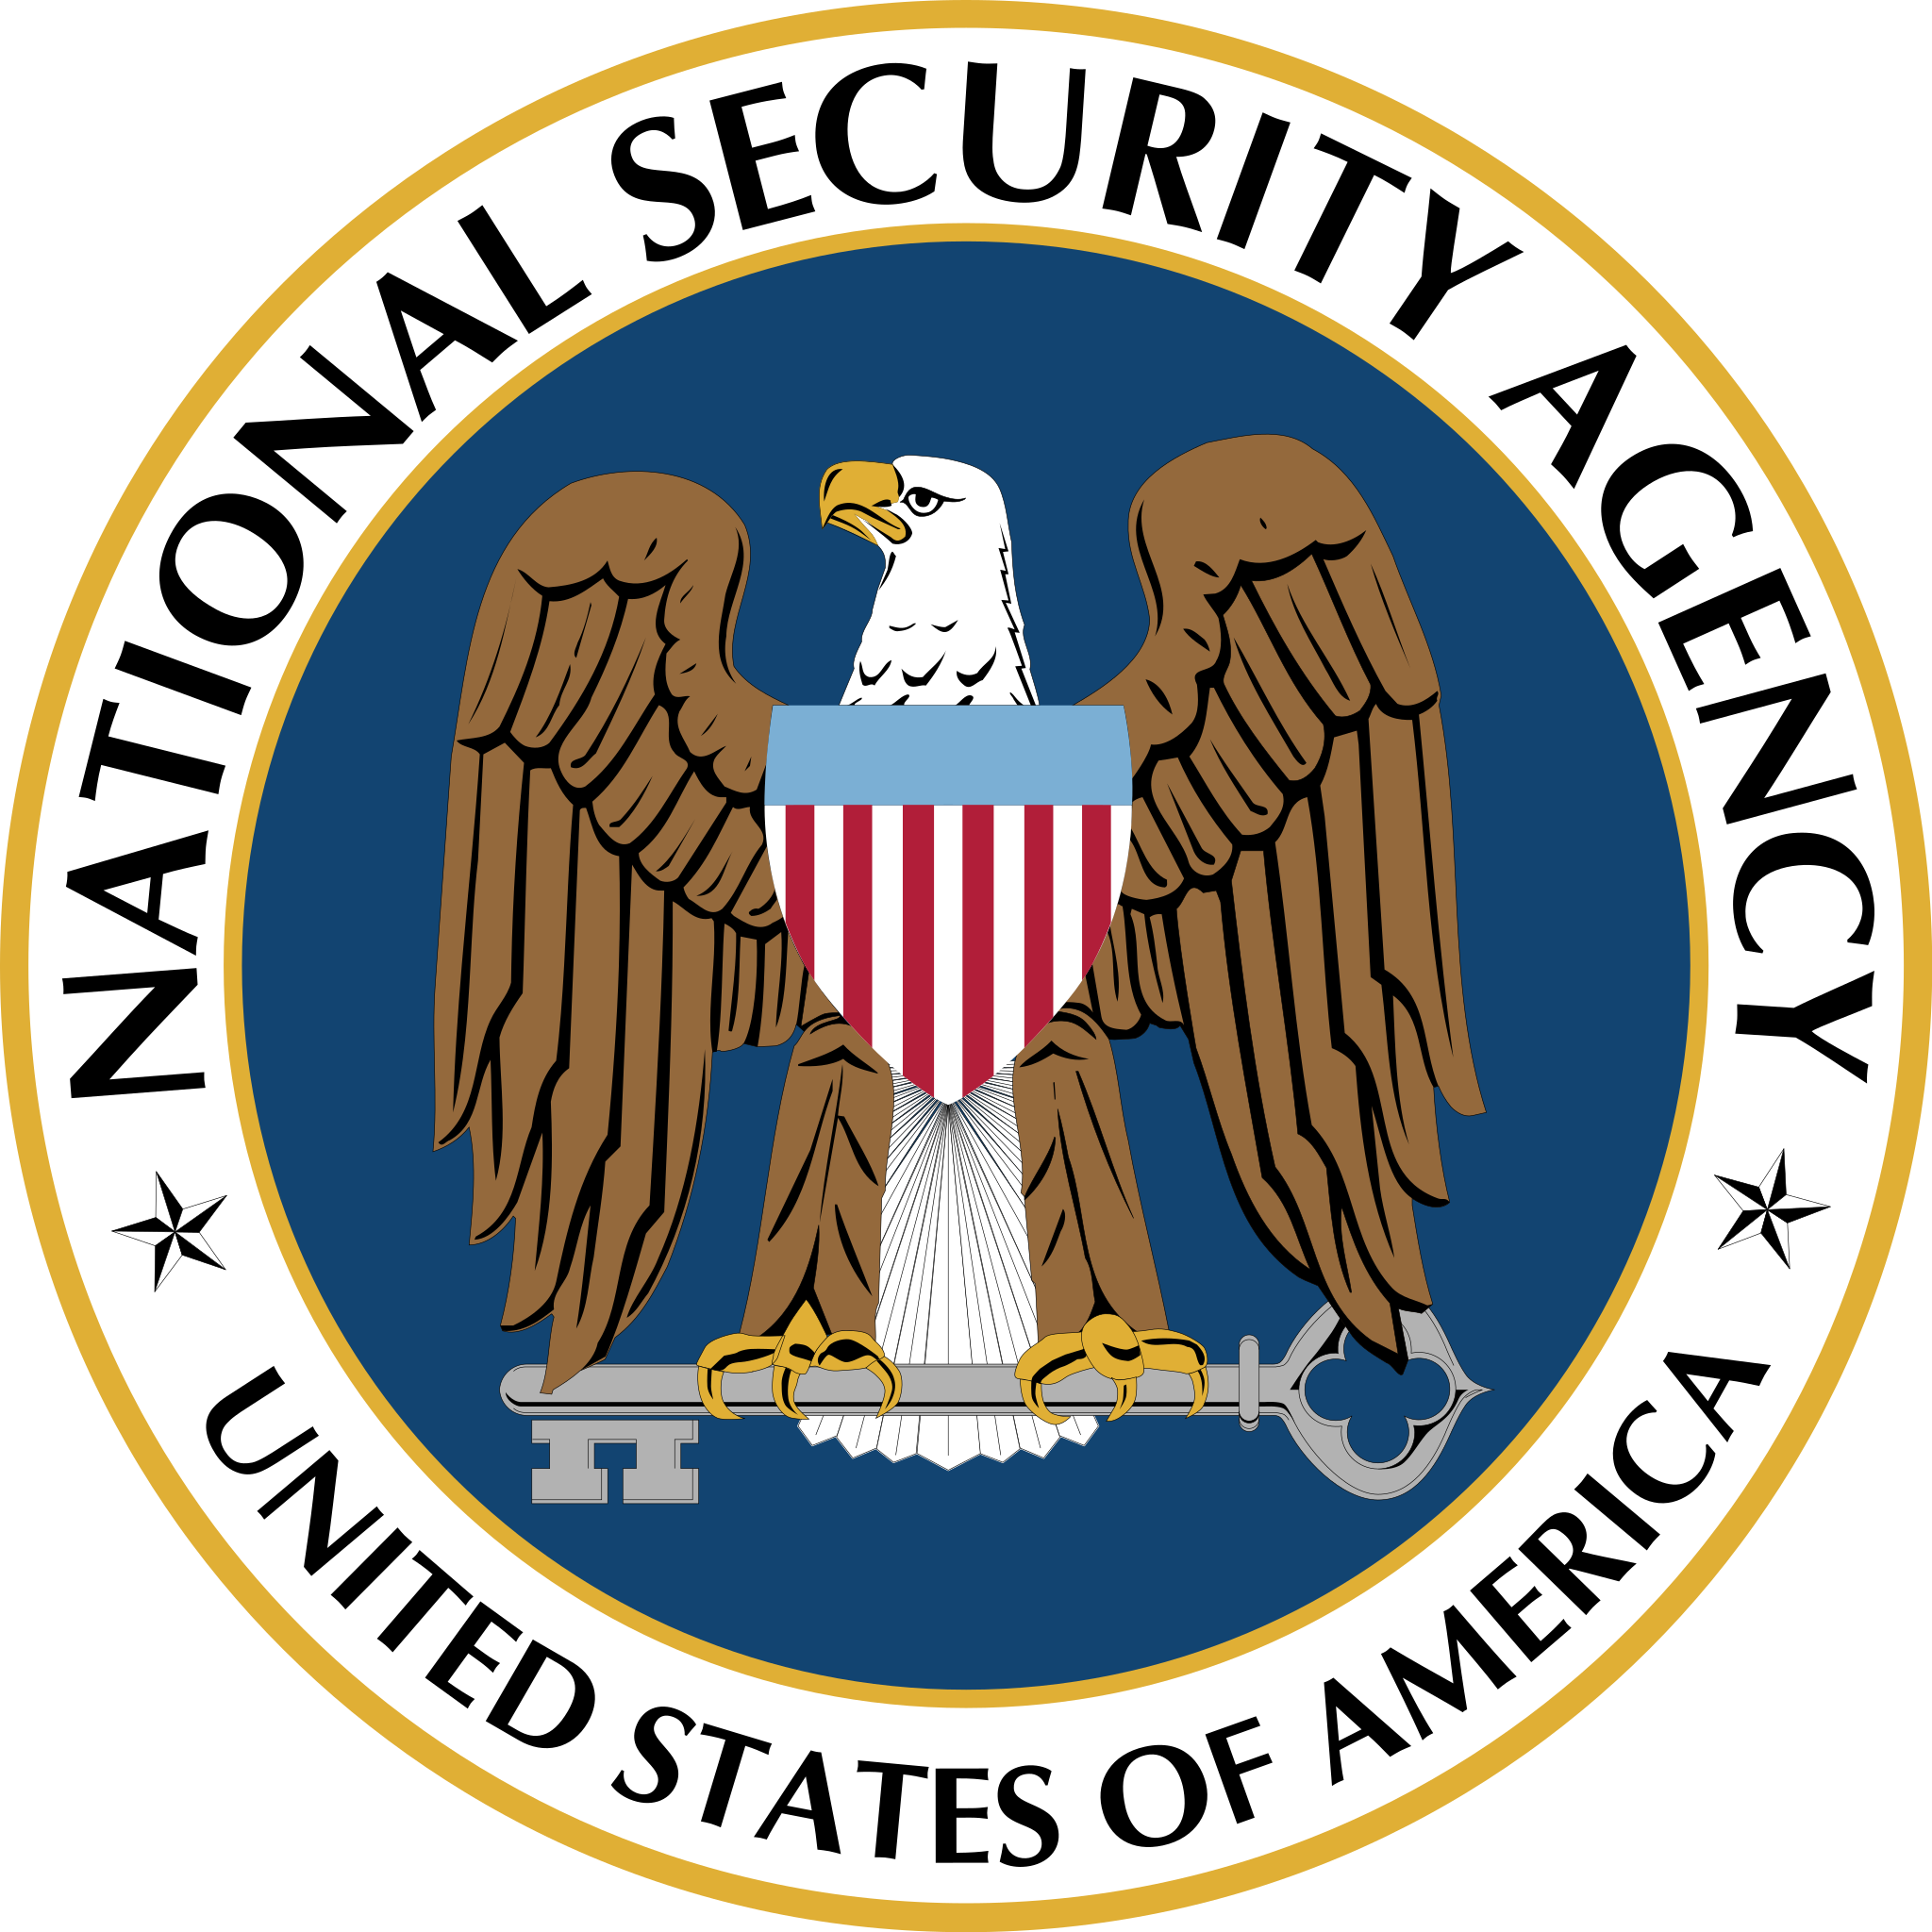 Seal of the United States National Security Agency